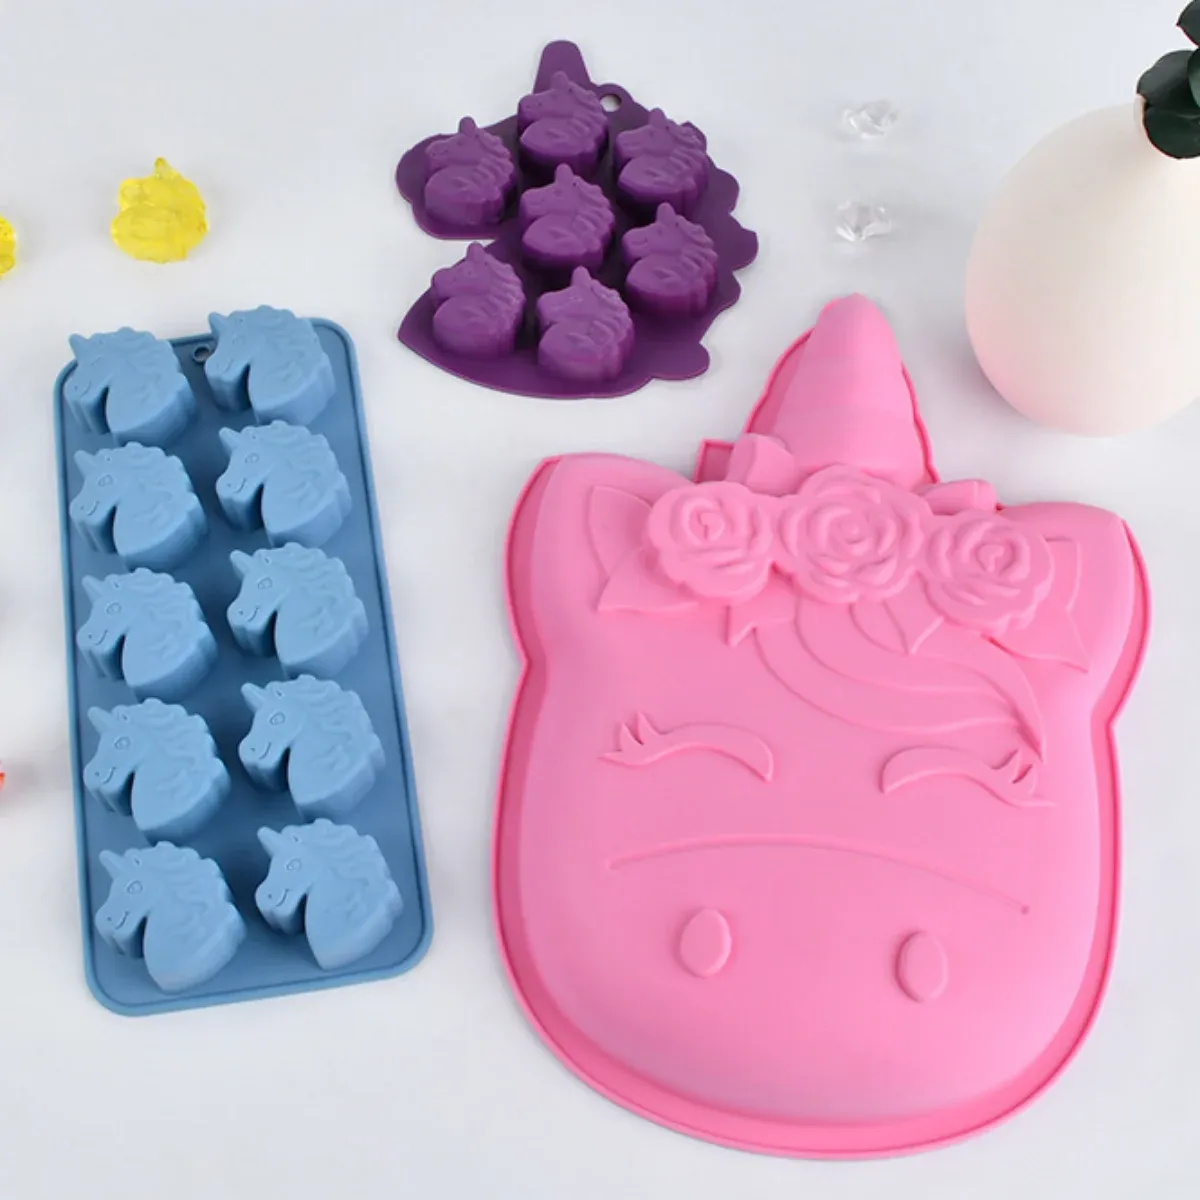 Moulds Creative Unicorn Baking Silicone Mold Horse Animal Chocolate Candy Biscuit Mould Candle Soap Making Ice Tray Mousse Cake Decor